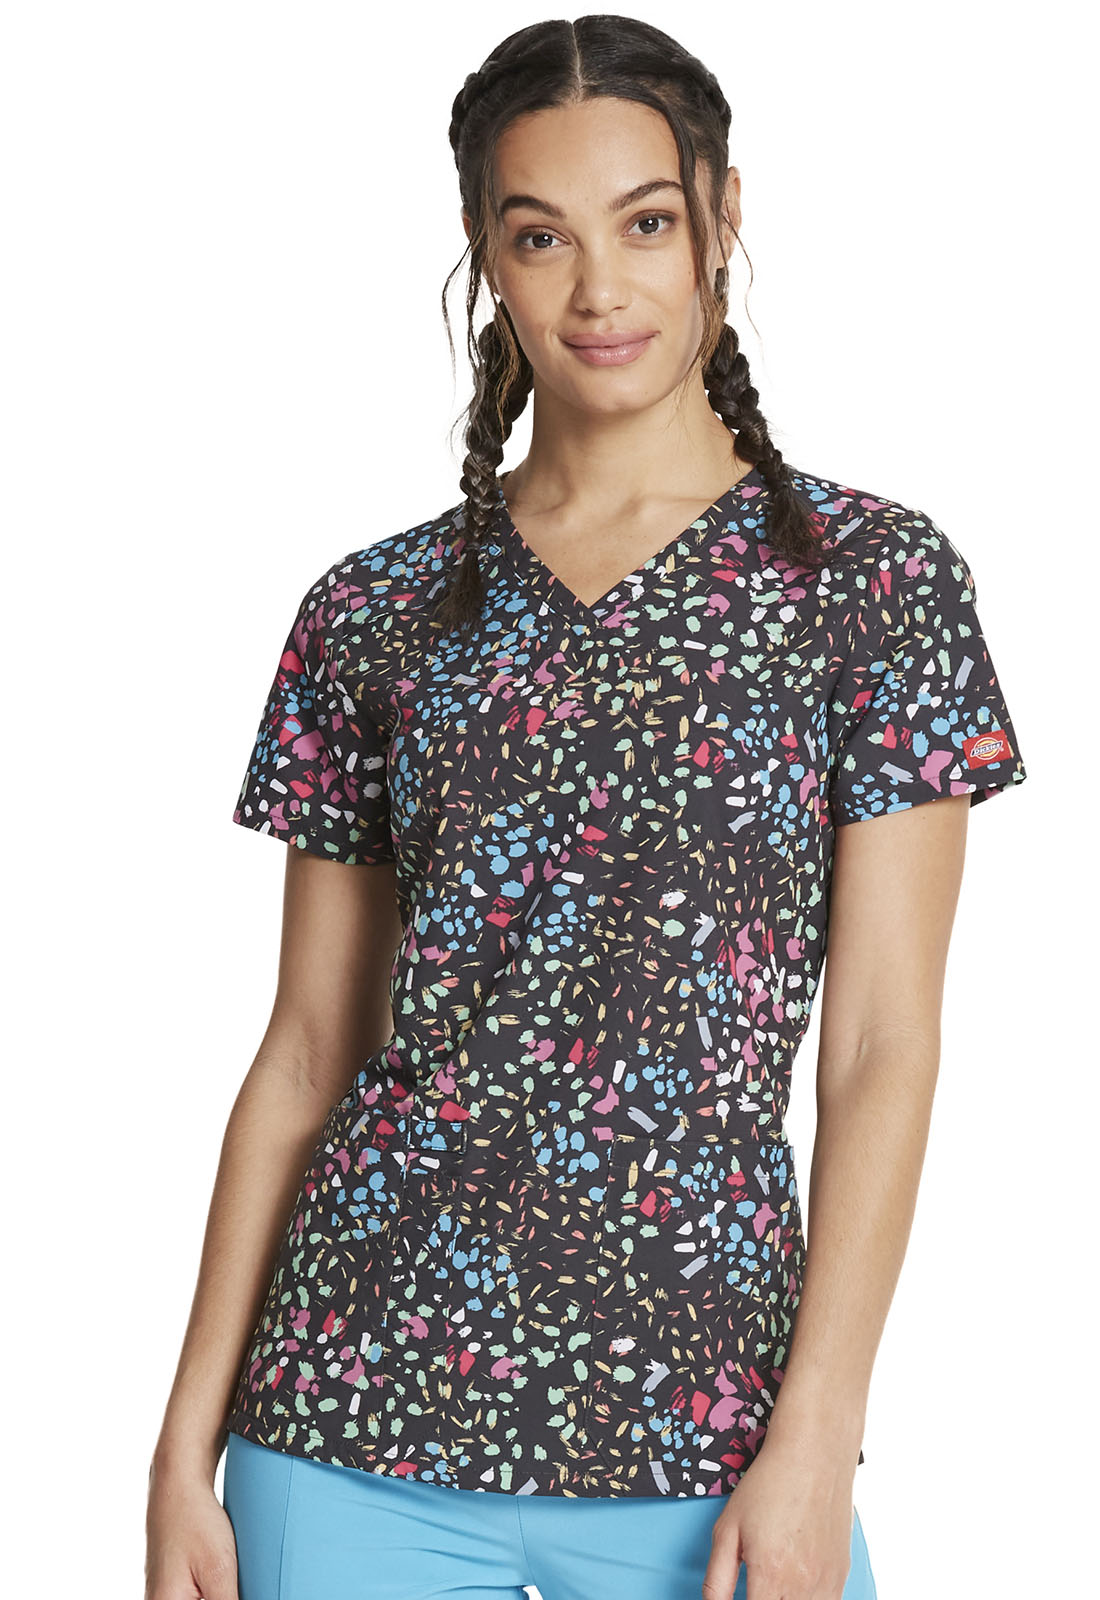 Details about   Dickies Women’s Print Scrub Top DK616 ITOL V-Neck Medical Size XXS to L 